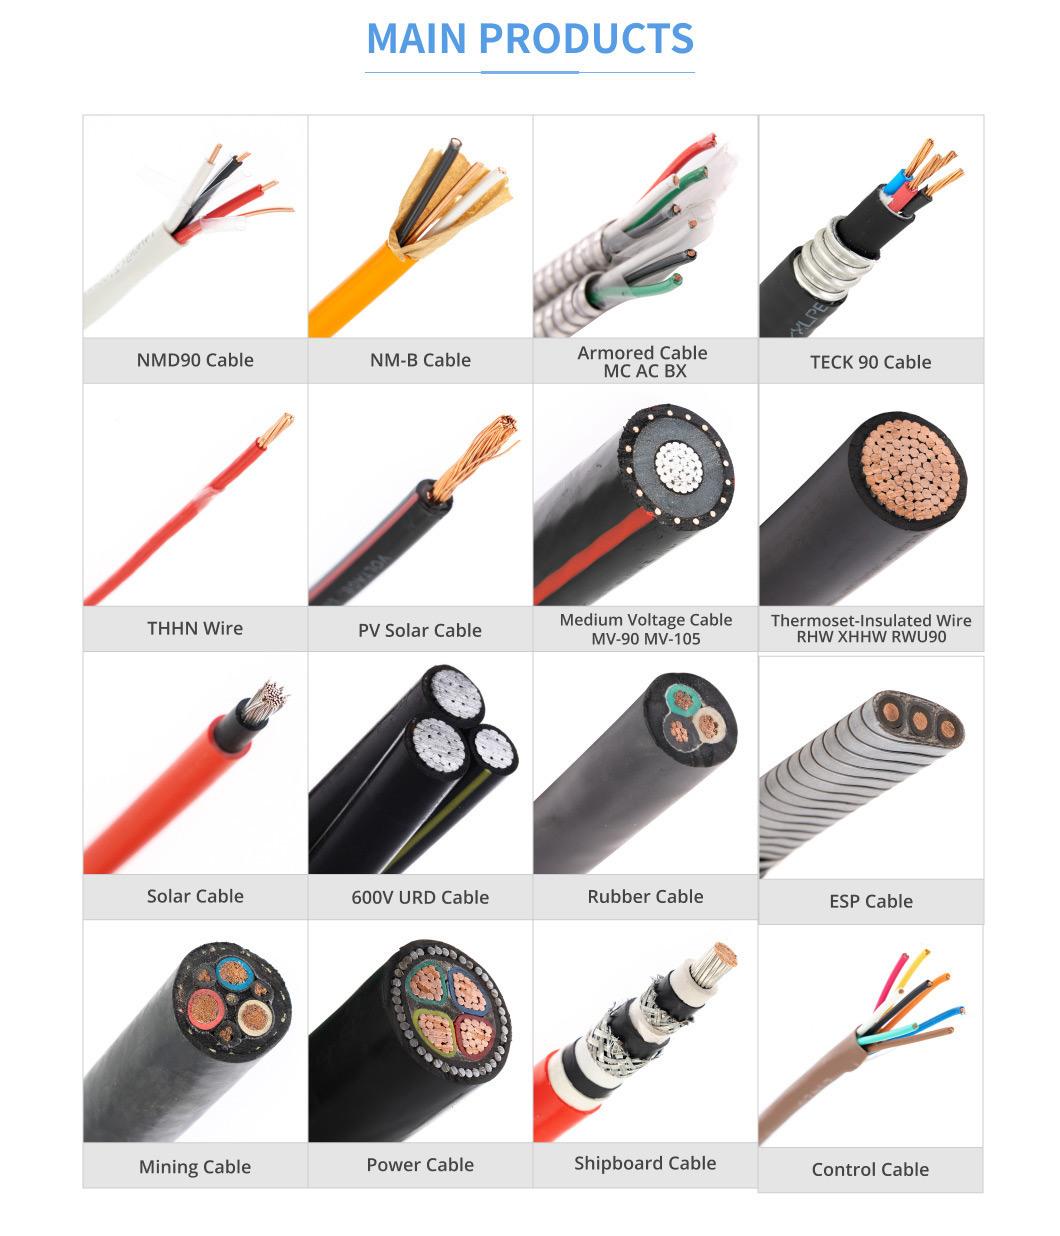 IEC Electric Wire Earth Ground 1.5mm2 2.5mm2 4mm2 6mm2 Copper or Aluminum PVC Insulation 300/500V Stranded House Wiring Cable